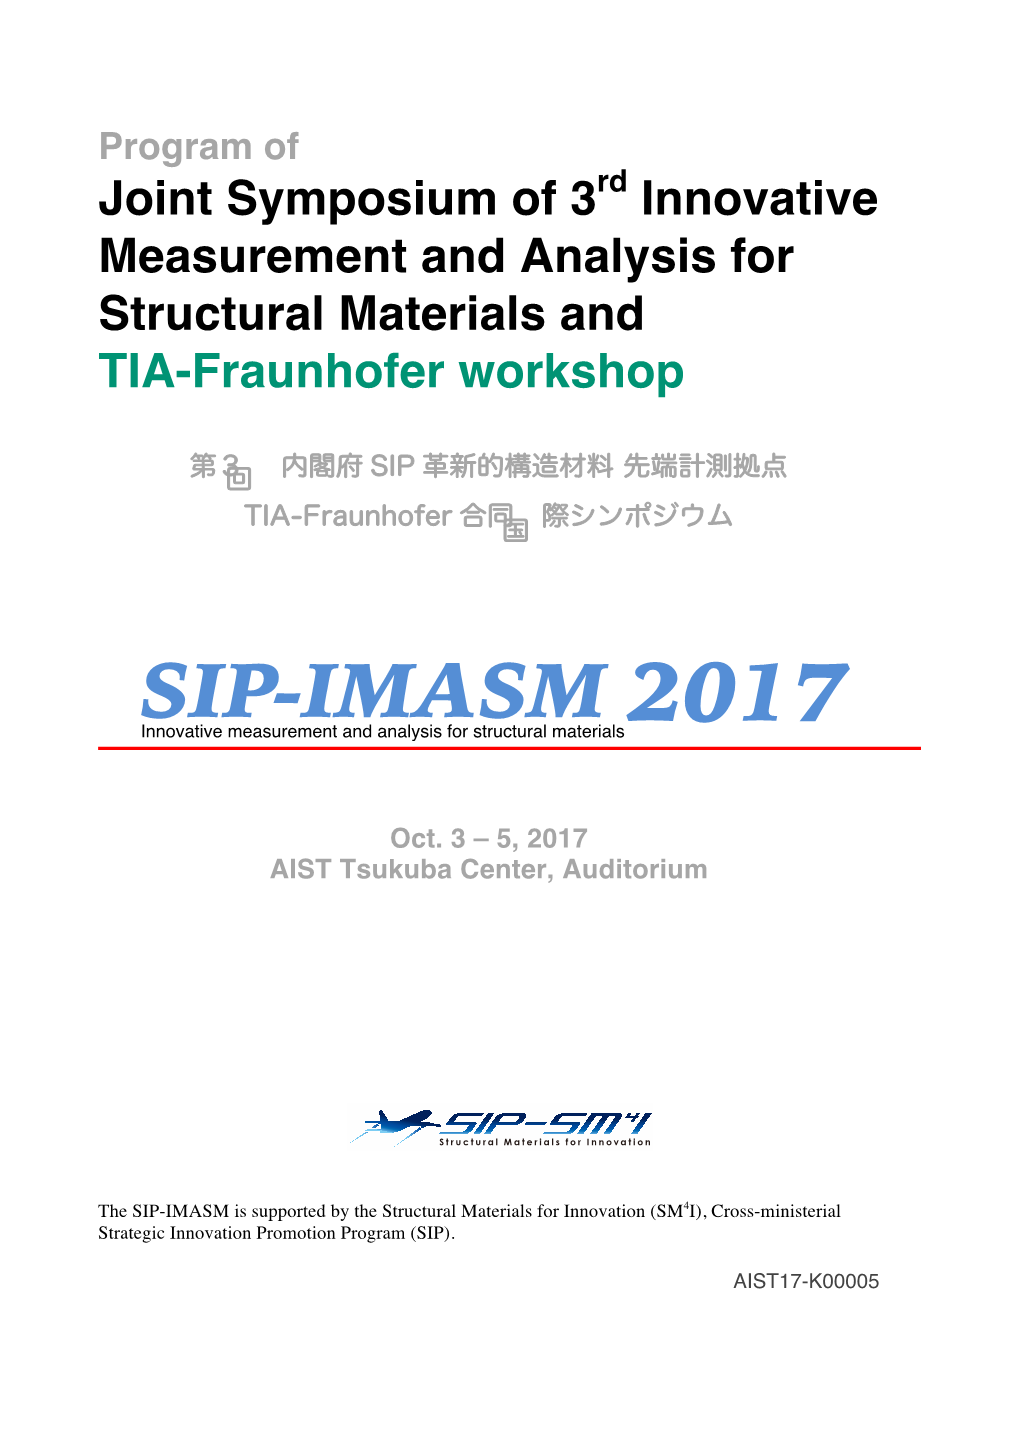 SIP-Imasminnovative Measurement and Analysis for Structural Materials�2017